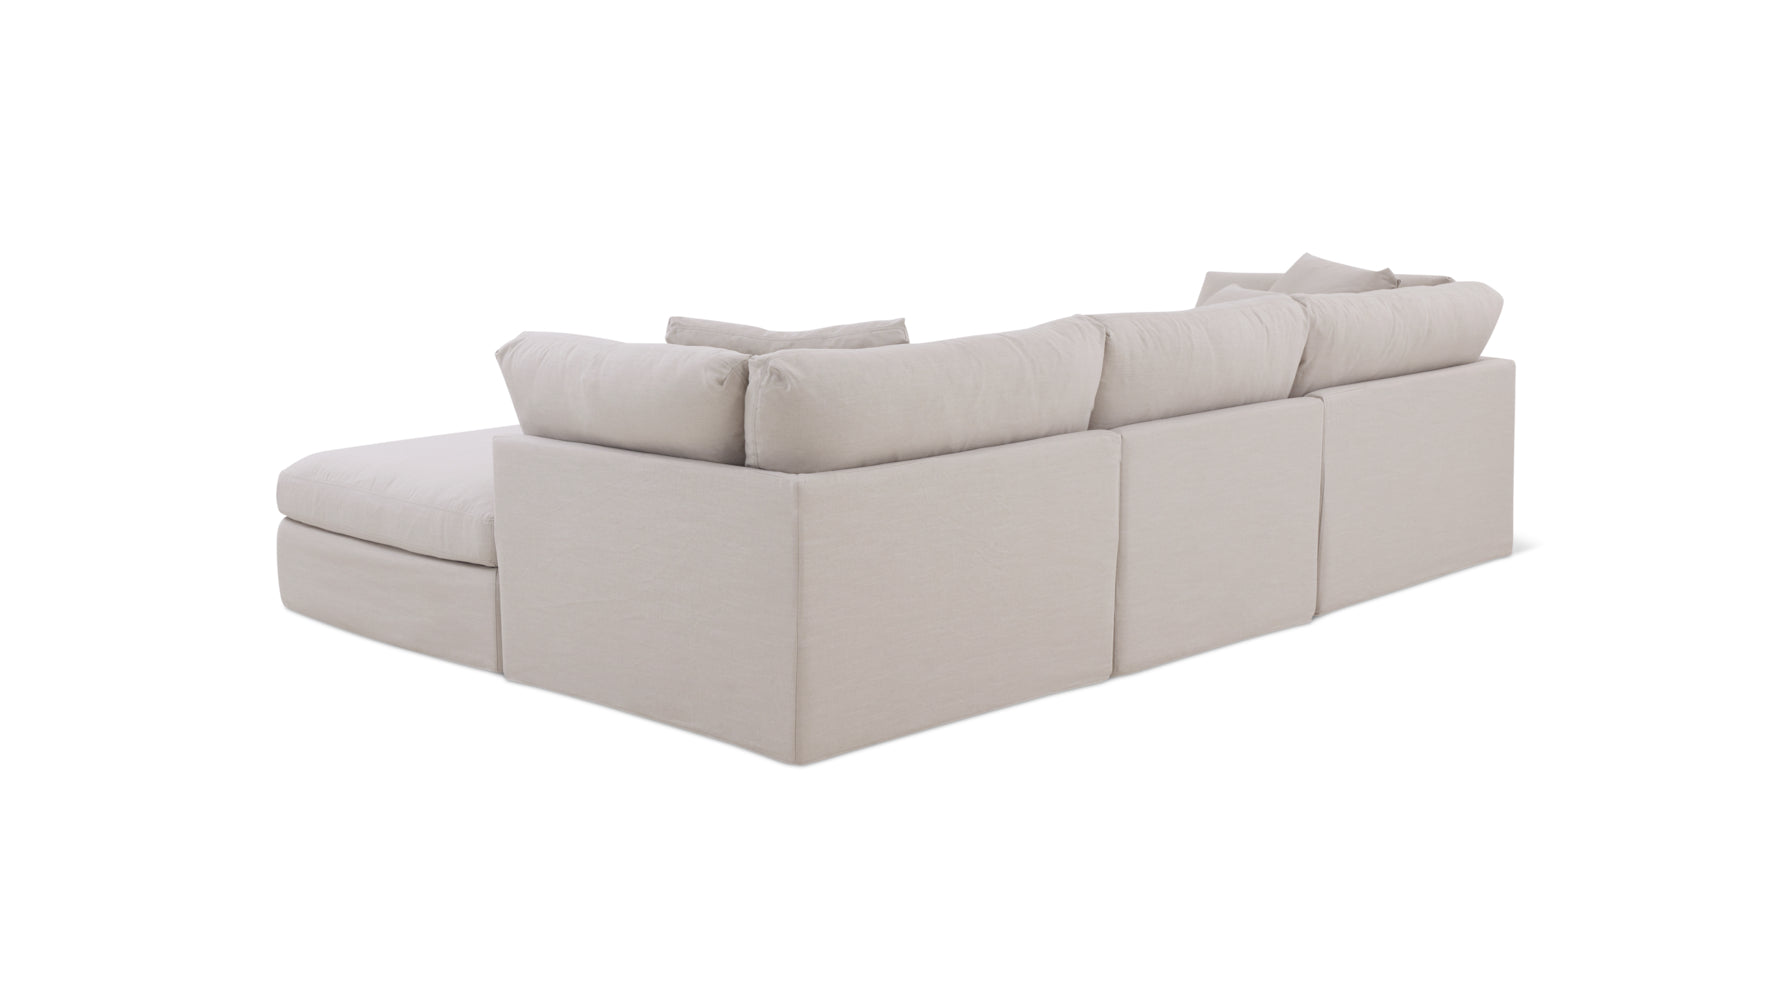 Get Together™ 4-Piece Modular Sectional, Large, Clay - Image 8